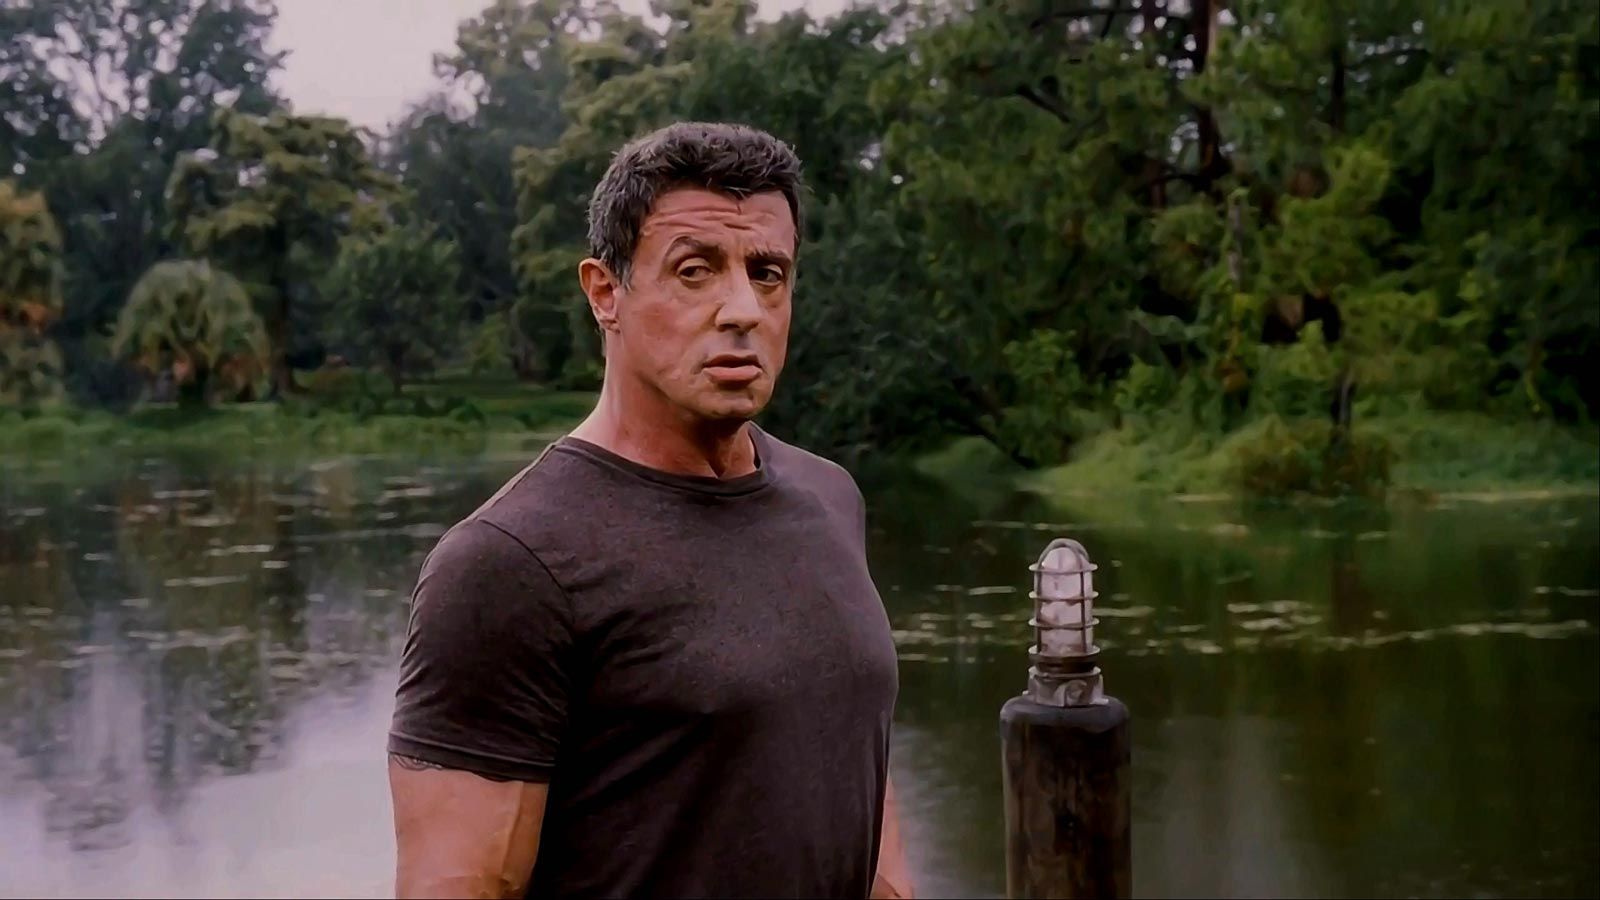 Sylvester Stallone gets ready for war in Bullet to the HeadWhen all is said and done, after all the punches are thrown and all the bullets have been fired, {44} wants fans to see this as an action drama that focuses more on character than spectacle.